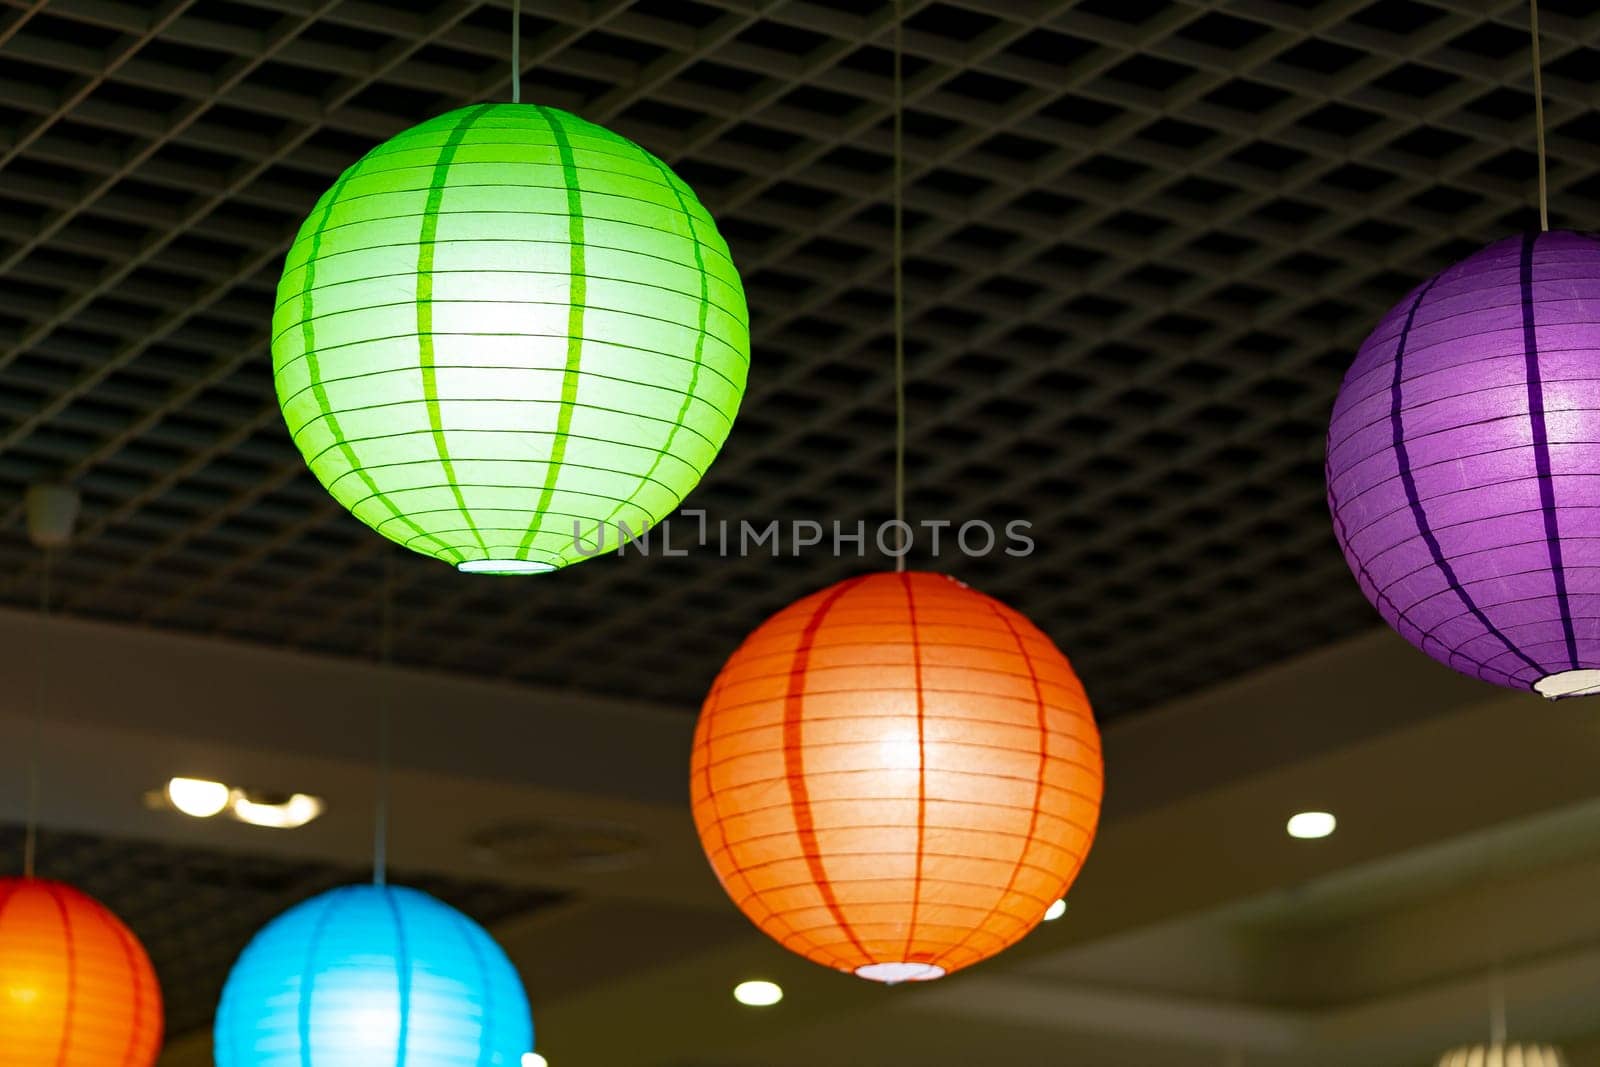 A collection of colorful paper lanterns hangs from the ceiling, gently illuminated from within. The lanterns, in hues of green, purple, orange, and blue, add a festive atmosphere to the indoor space, suggesting a celebration or cultural event.